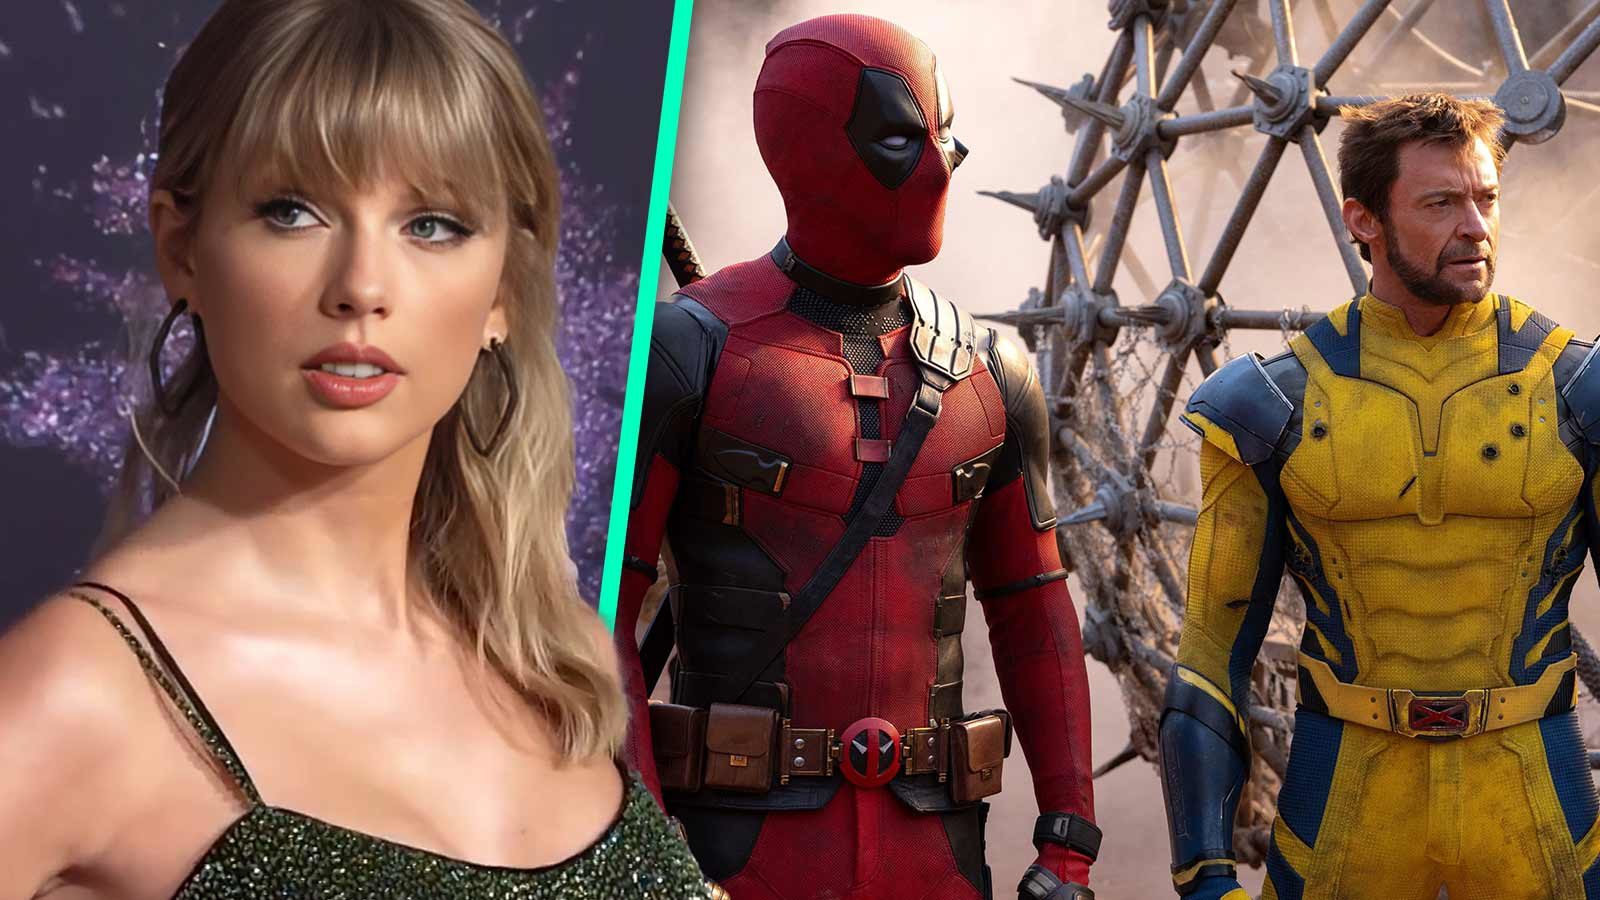 NSYNC, Green Day, Avril Lavigne Even Hugh Jackman’s Song Will be Played in Deadpool & Wolverine But There is a Sad News For Taylor Swift Fans